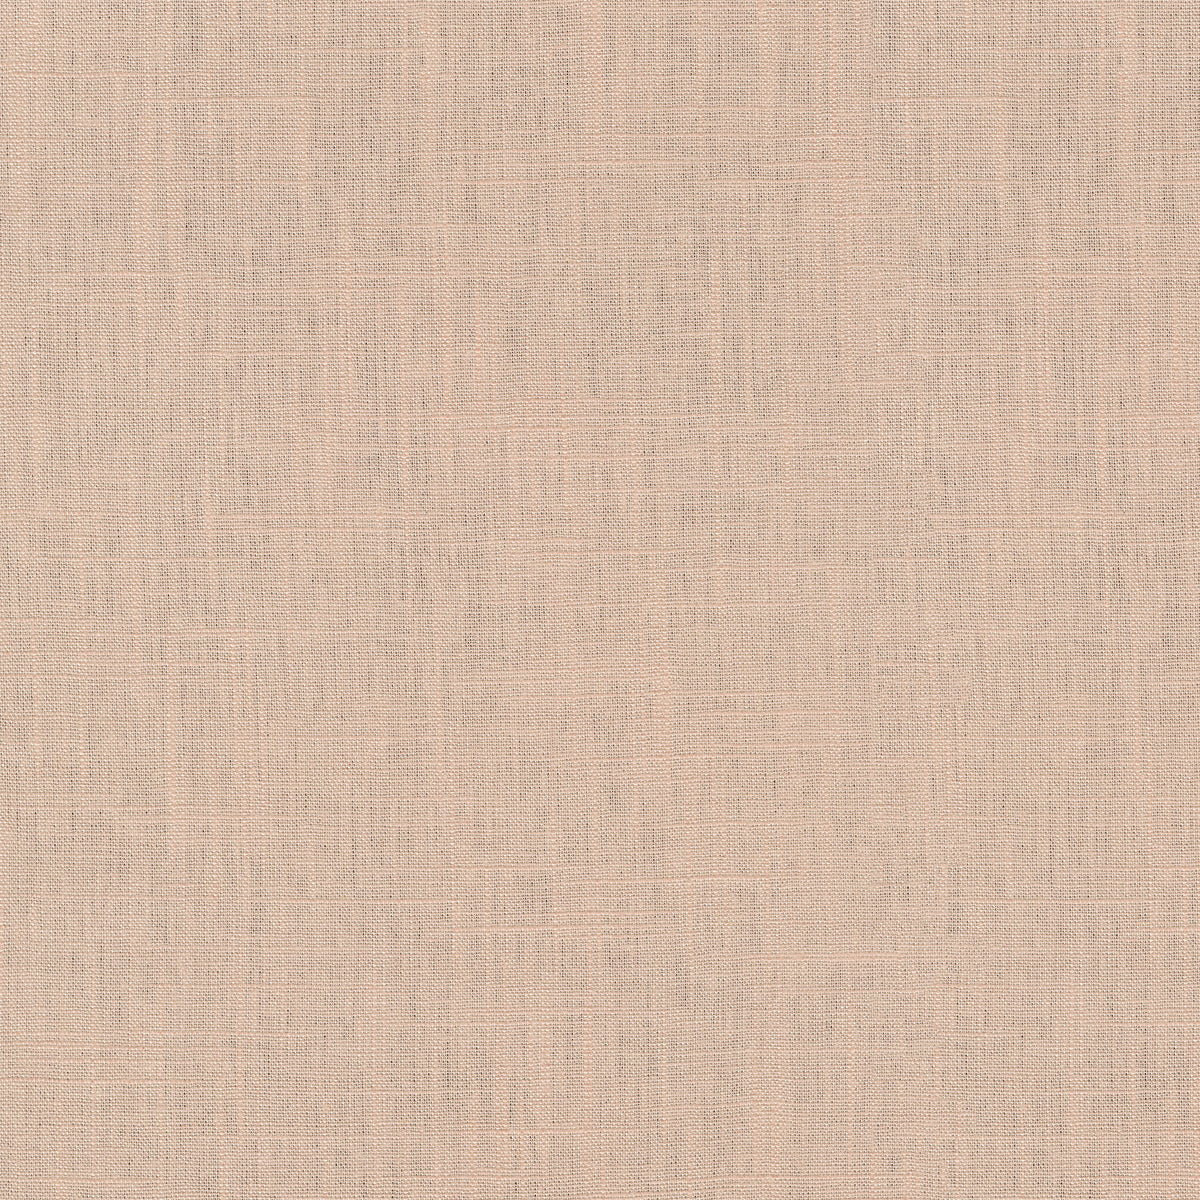 P/K Lifestyles Chester - Cameo 412068 Fabric Swatch